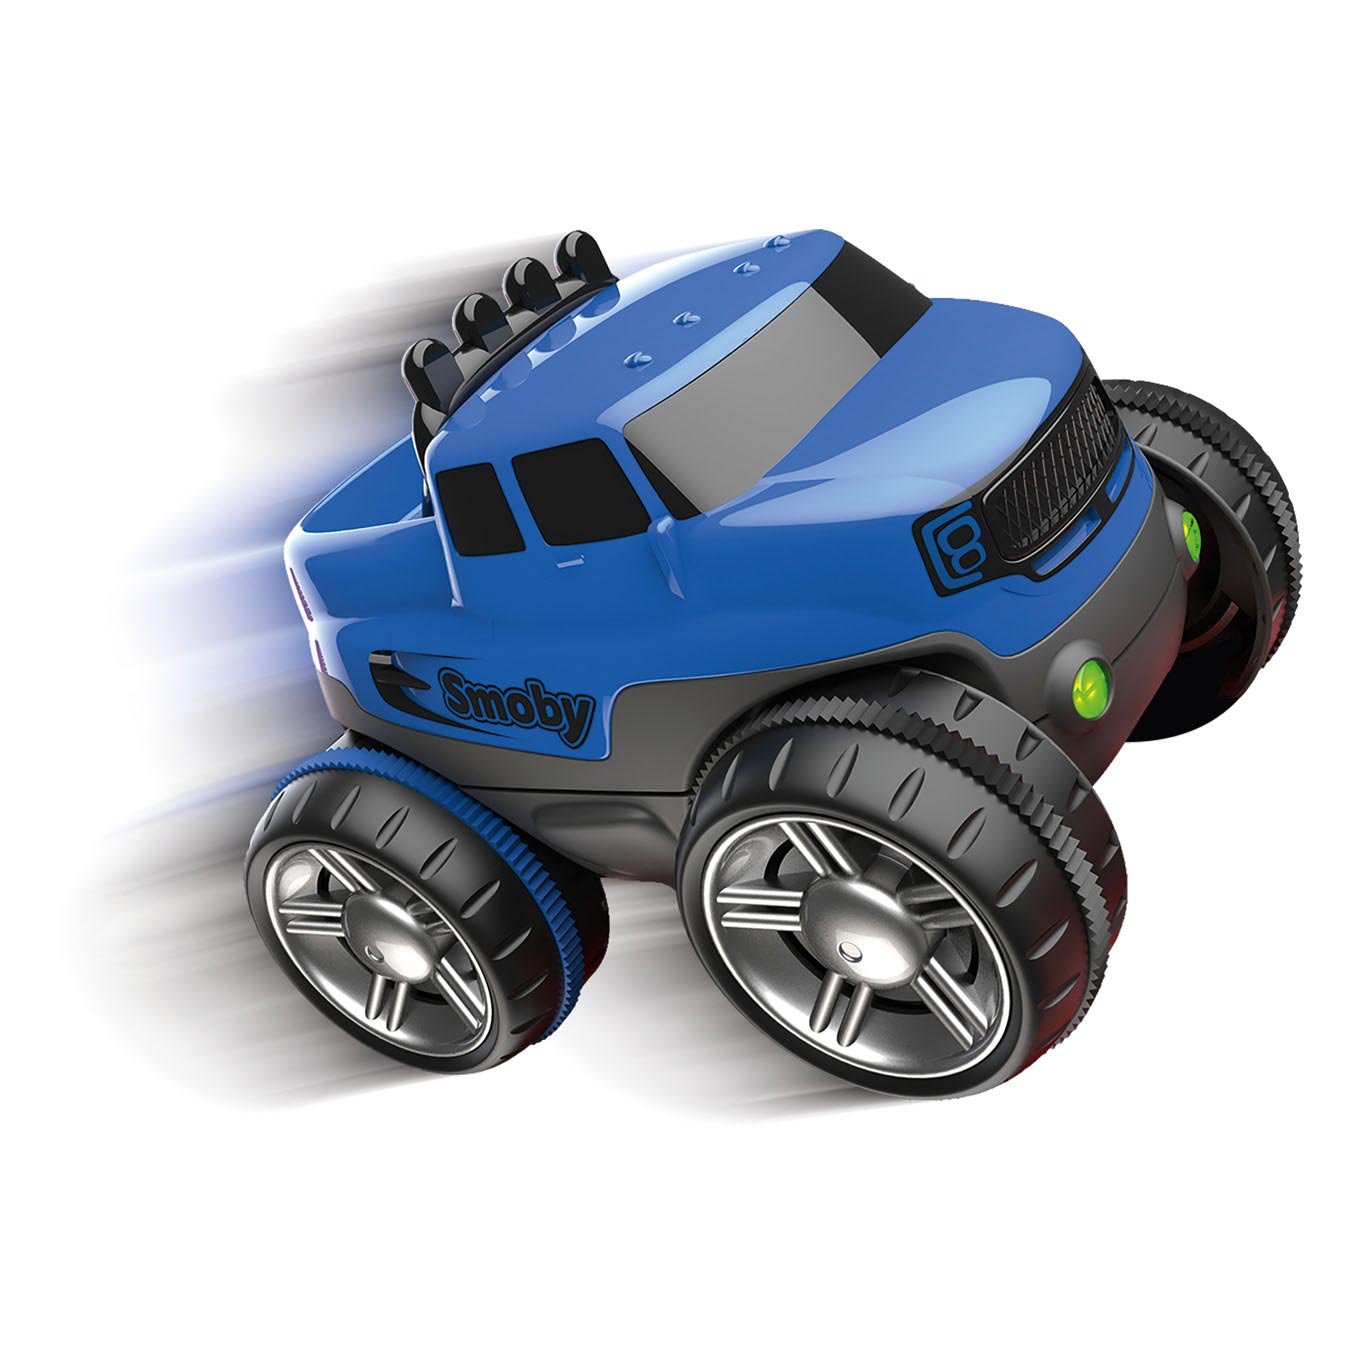 Smoby Flextreme Truck